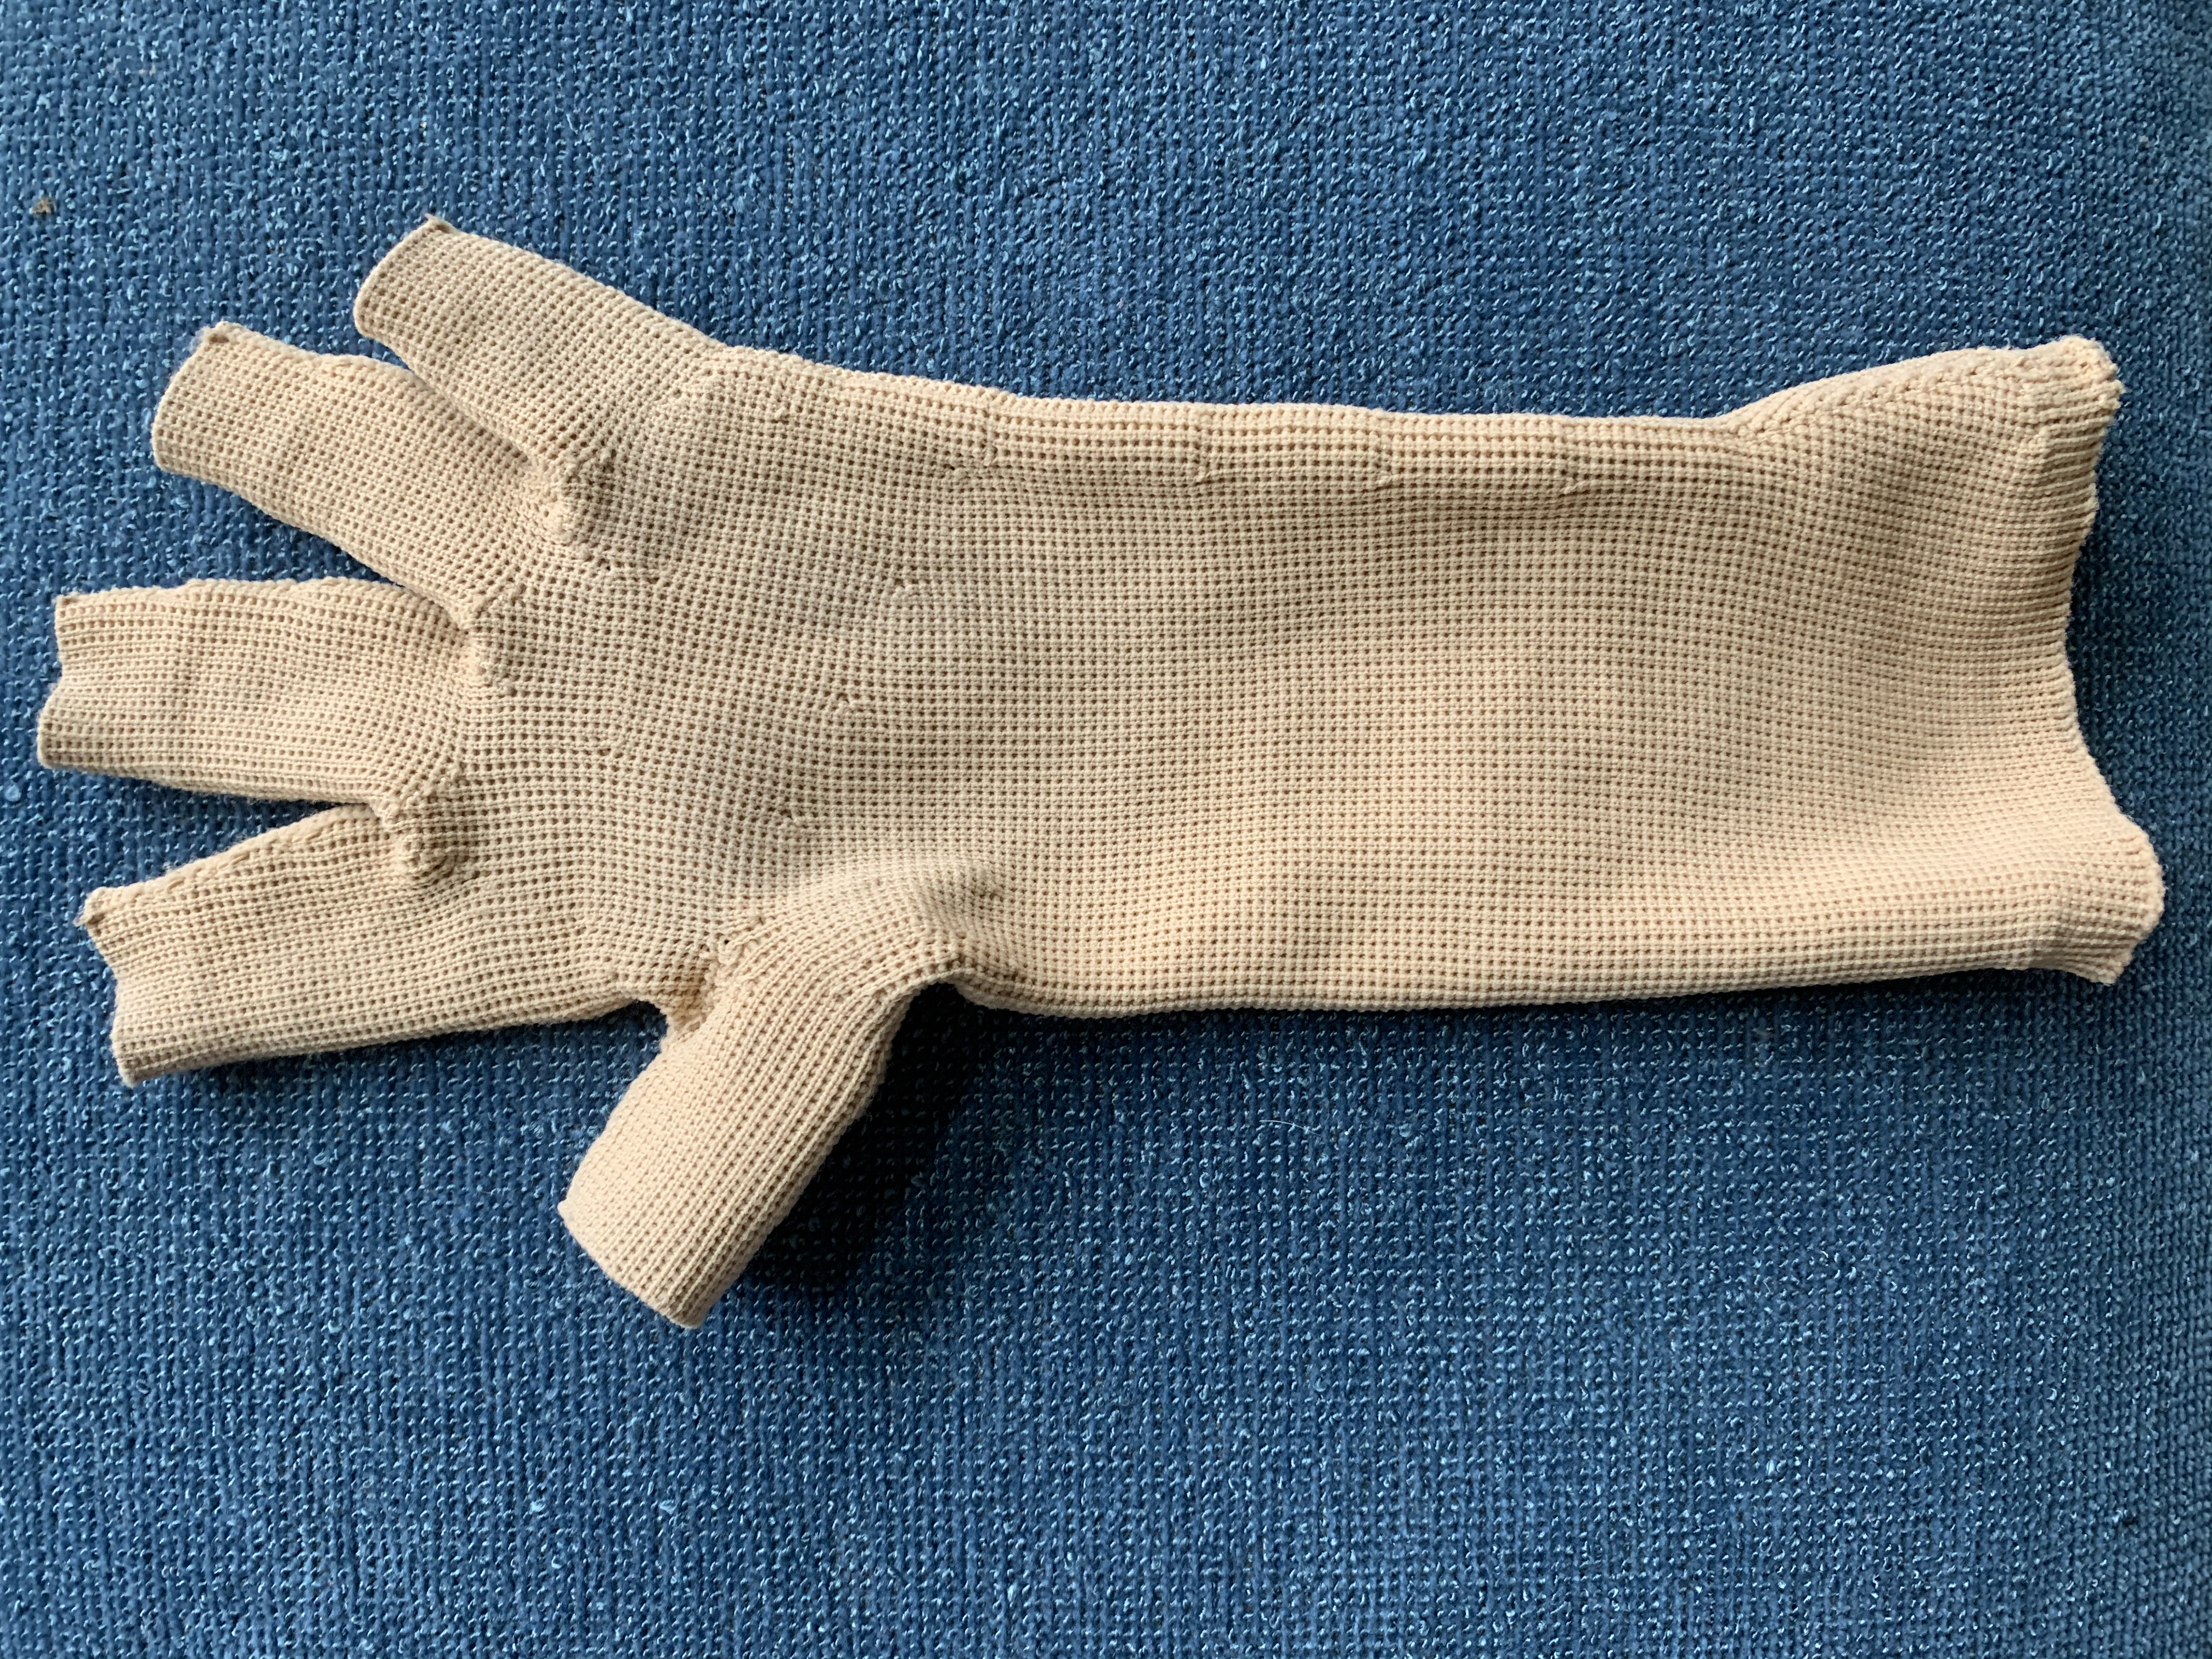 NIST_L1_Eng_Act_MeetTheMeasurements_PhysTherapy_Glove.png